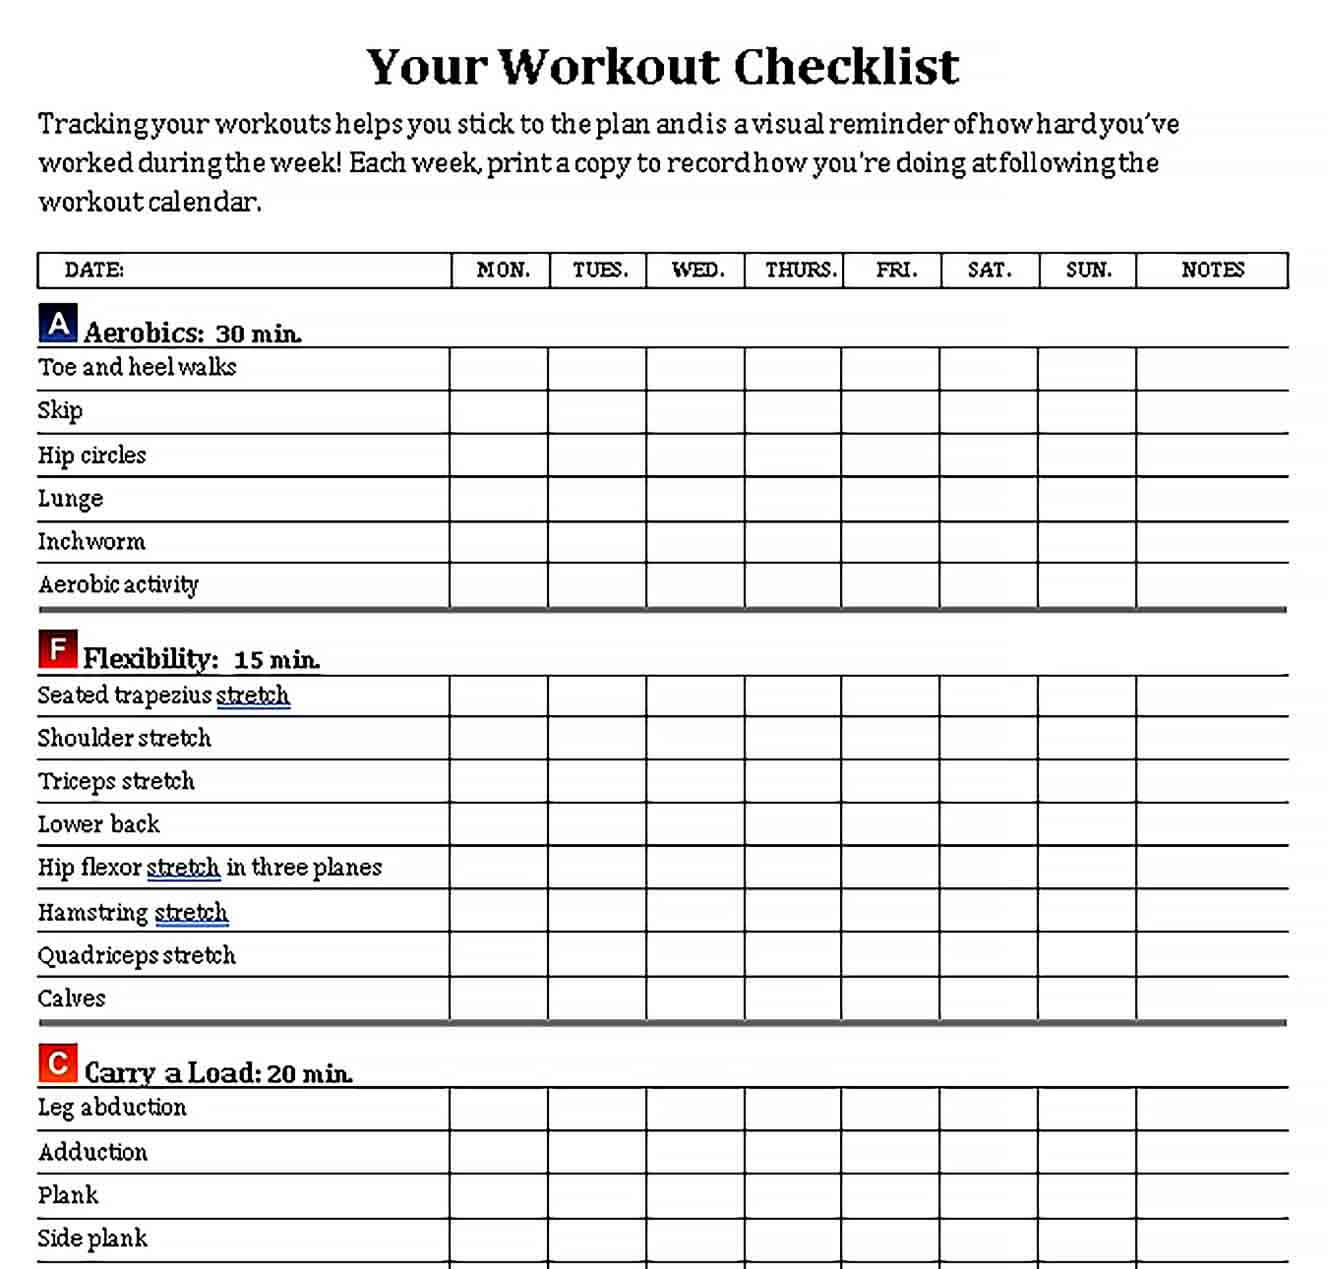 Sample Personal Workout Checklist Template